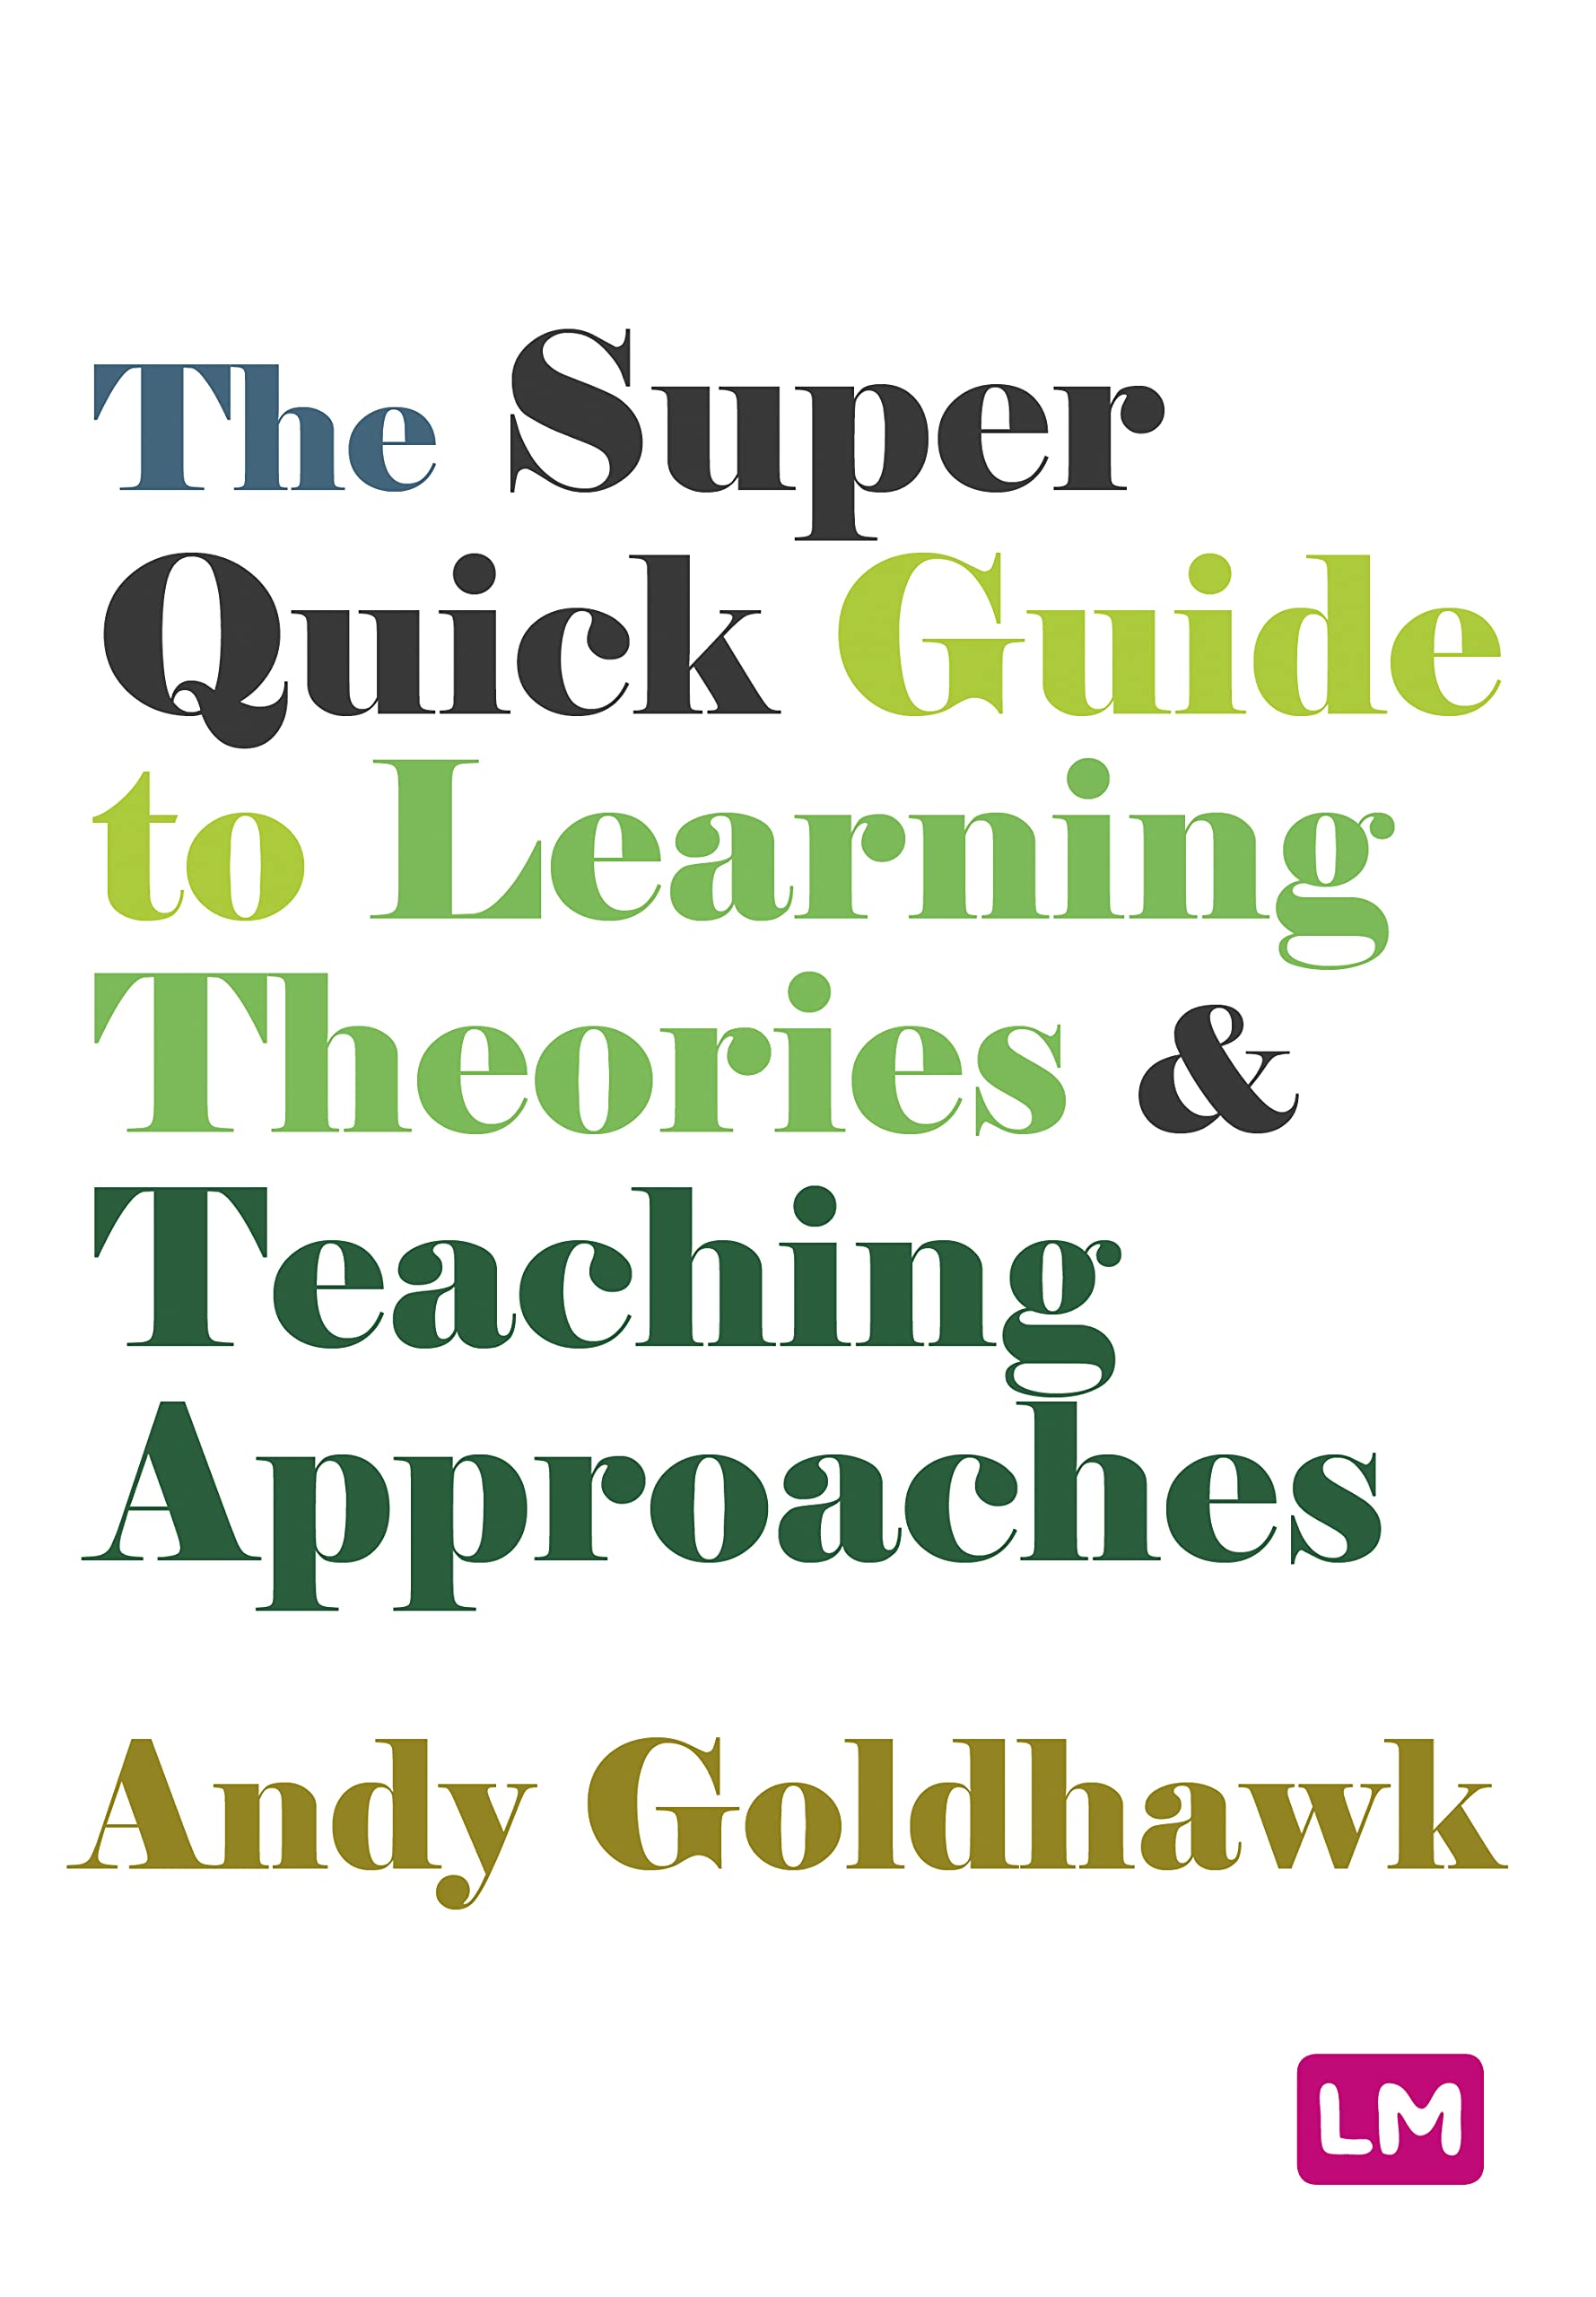 The Super Quick Guide to Learning Theories and Teaching Approaches | Andy Goldhawk